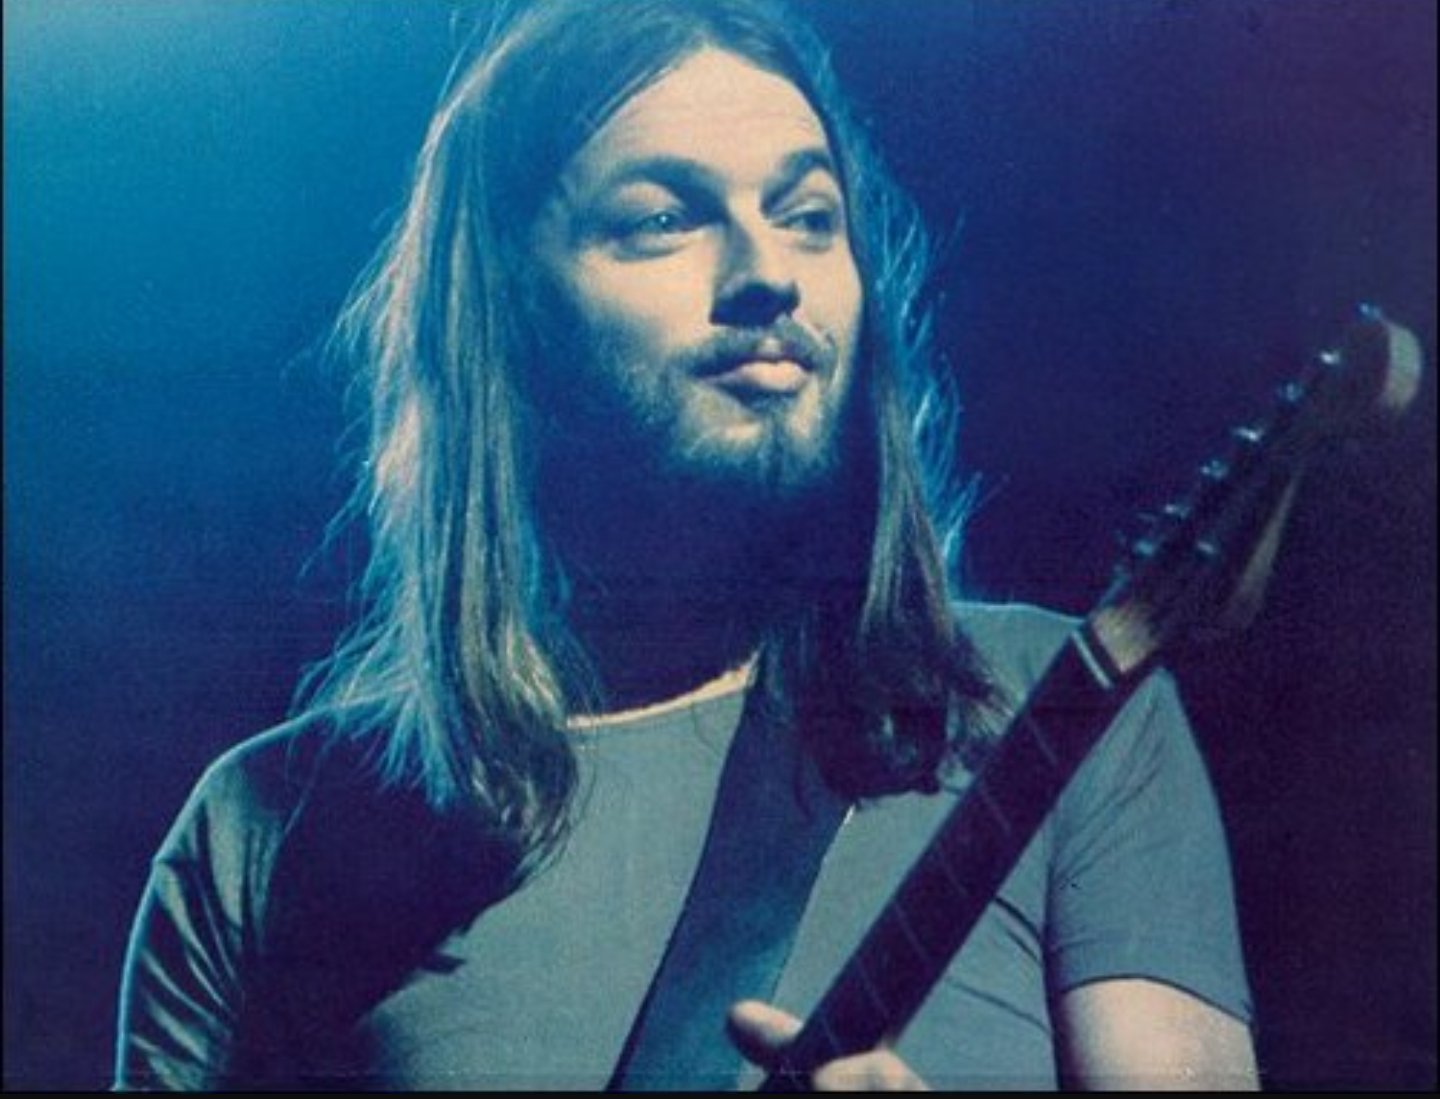 Happy Birthday David Gilmour. One of the reasons I enjoy Pink Floyd so much. He truly is a guitar God 